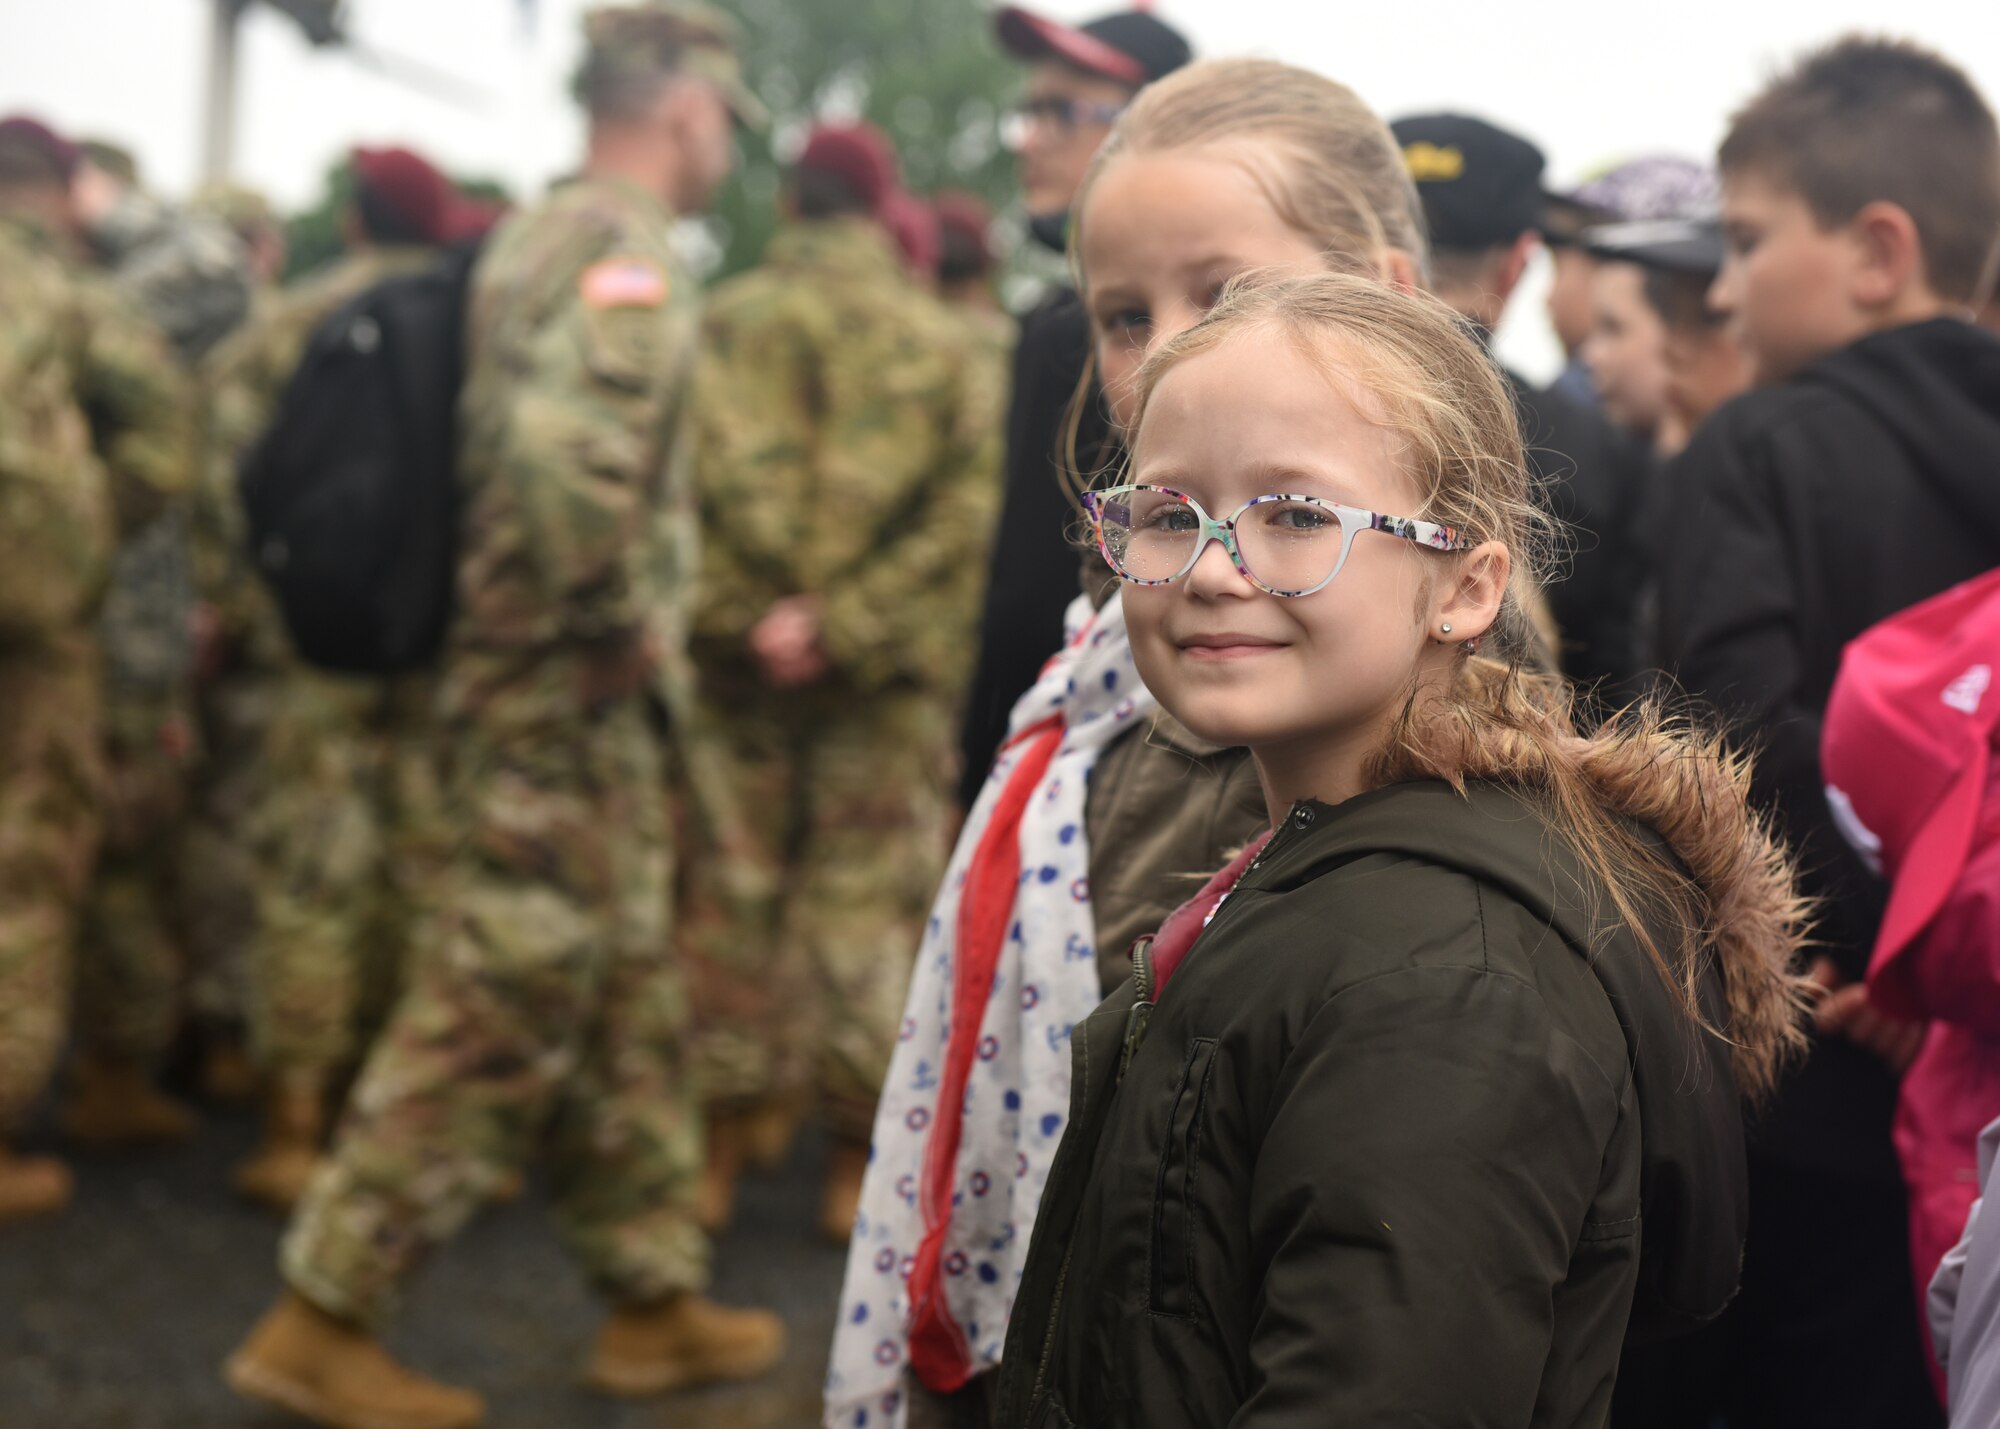 A person observes military members during a celebration.